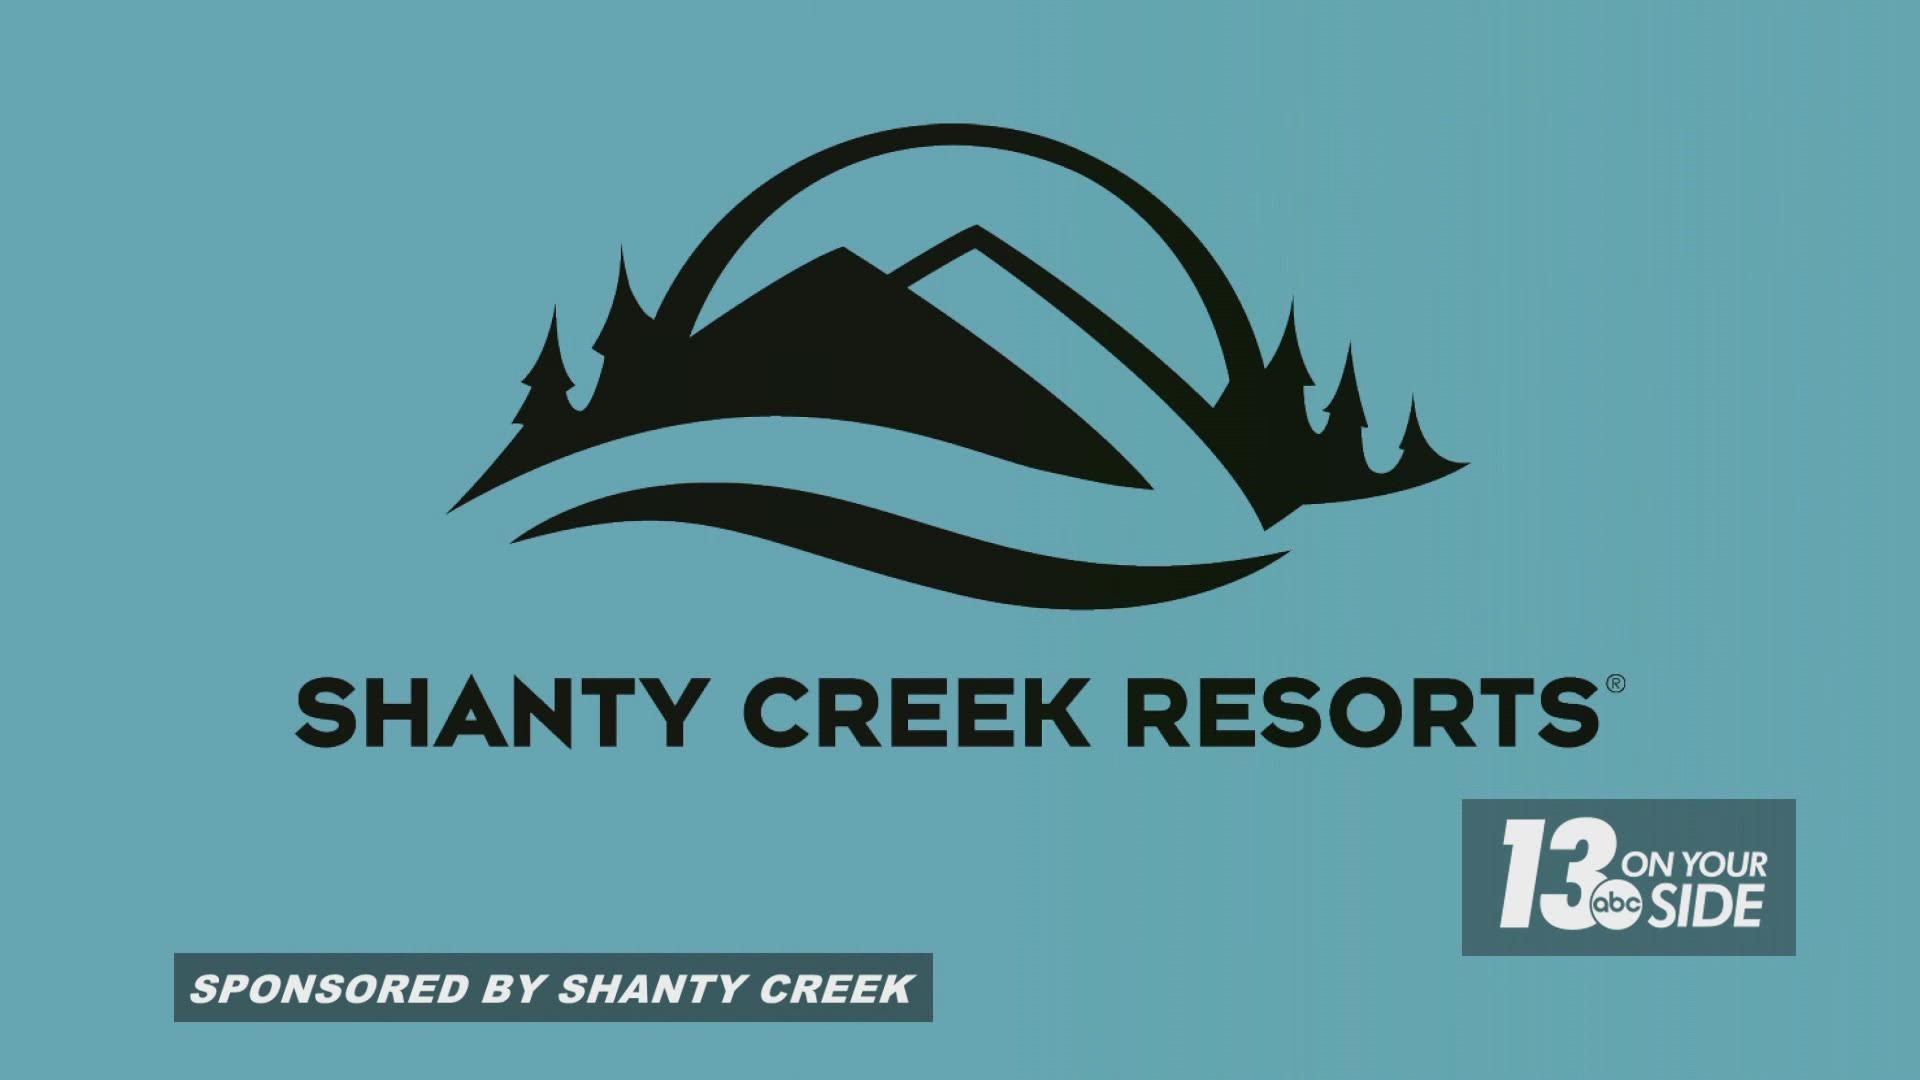 Visitors often make Shanty Creek their home base and they experience all the region has to offer.